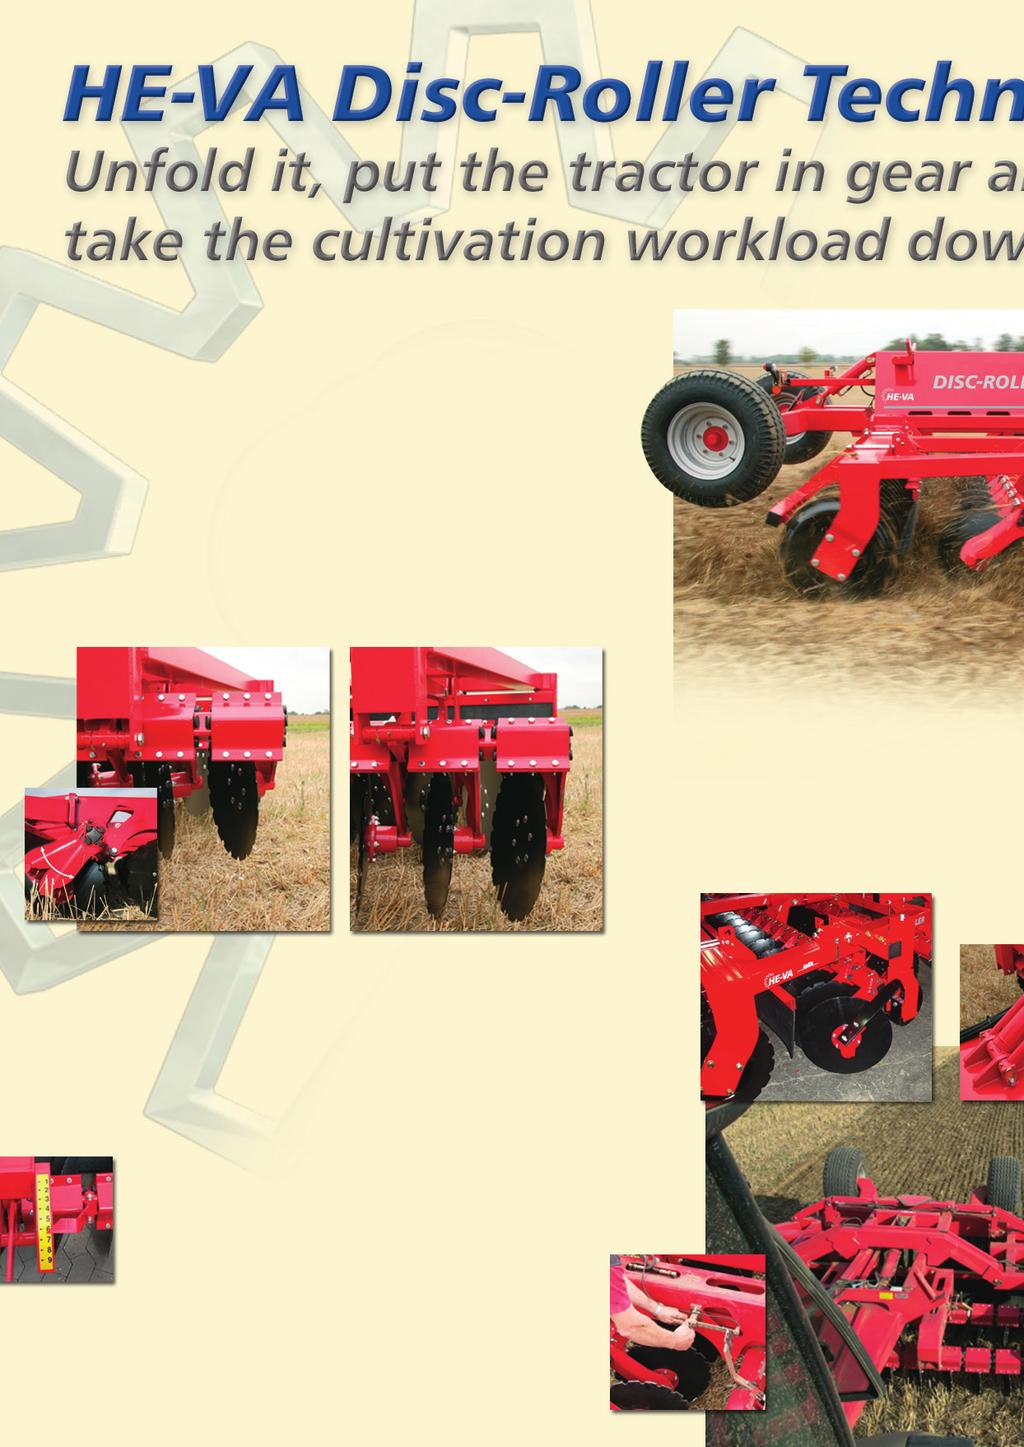 The HE-VA Disc-Roller has the key ingredient of any effective cultivation machine - it works - it is simple and most important it saves time and money.